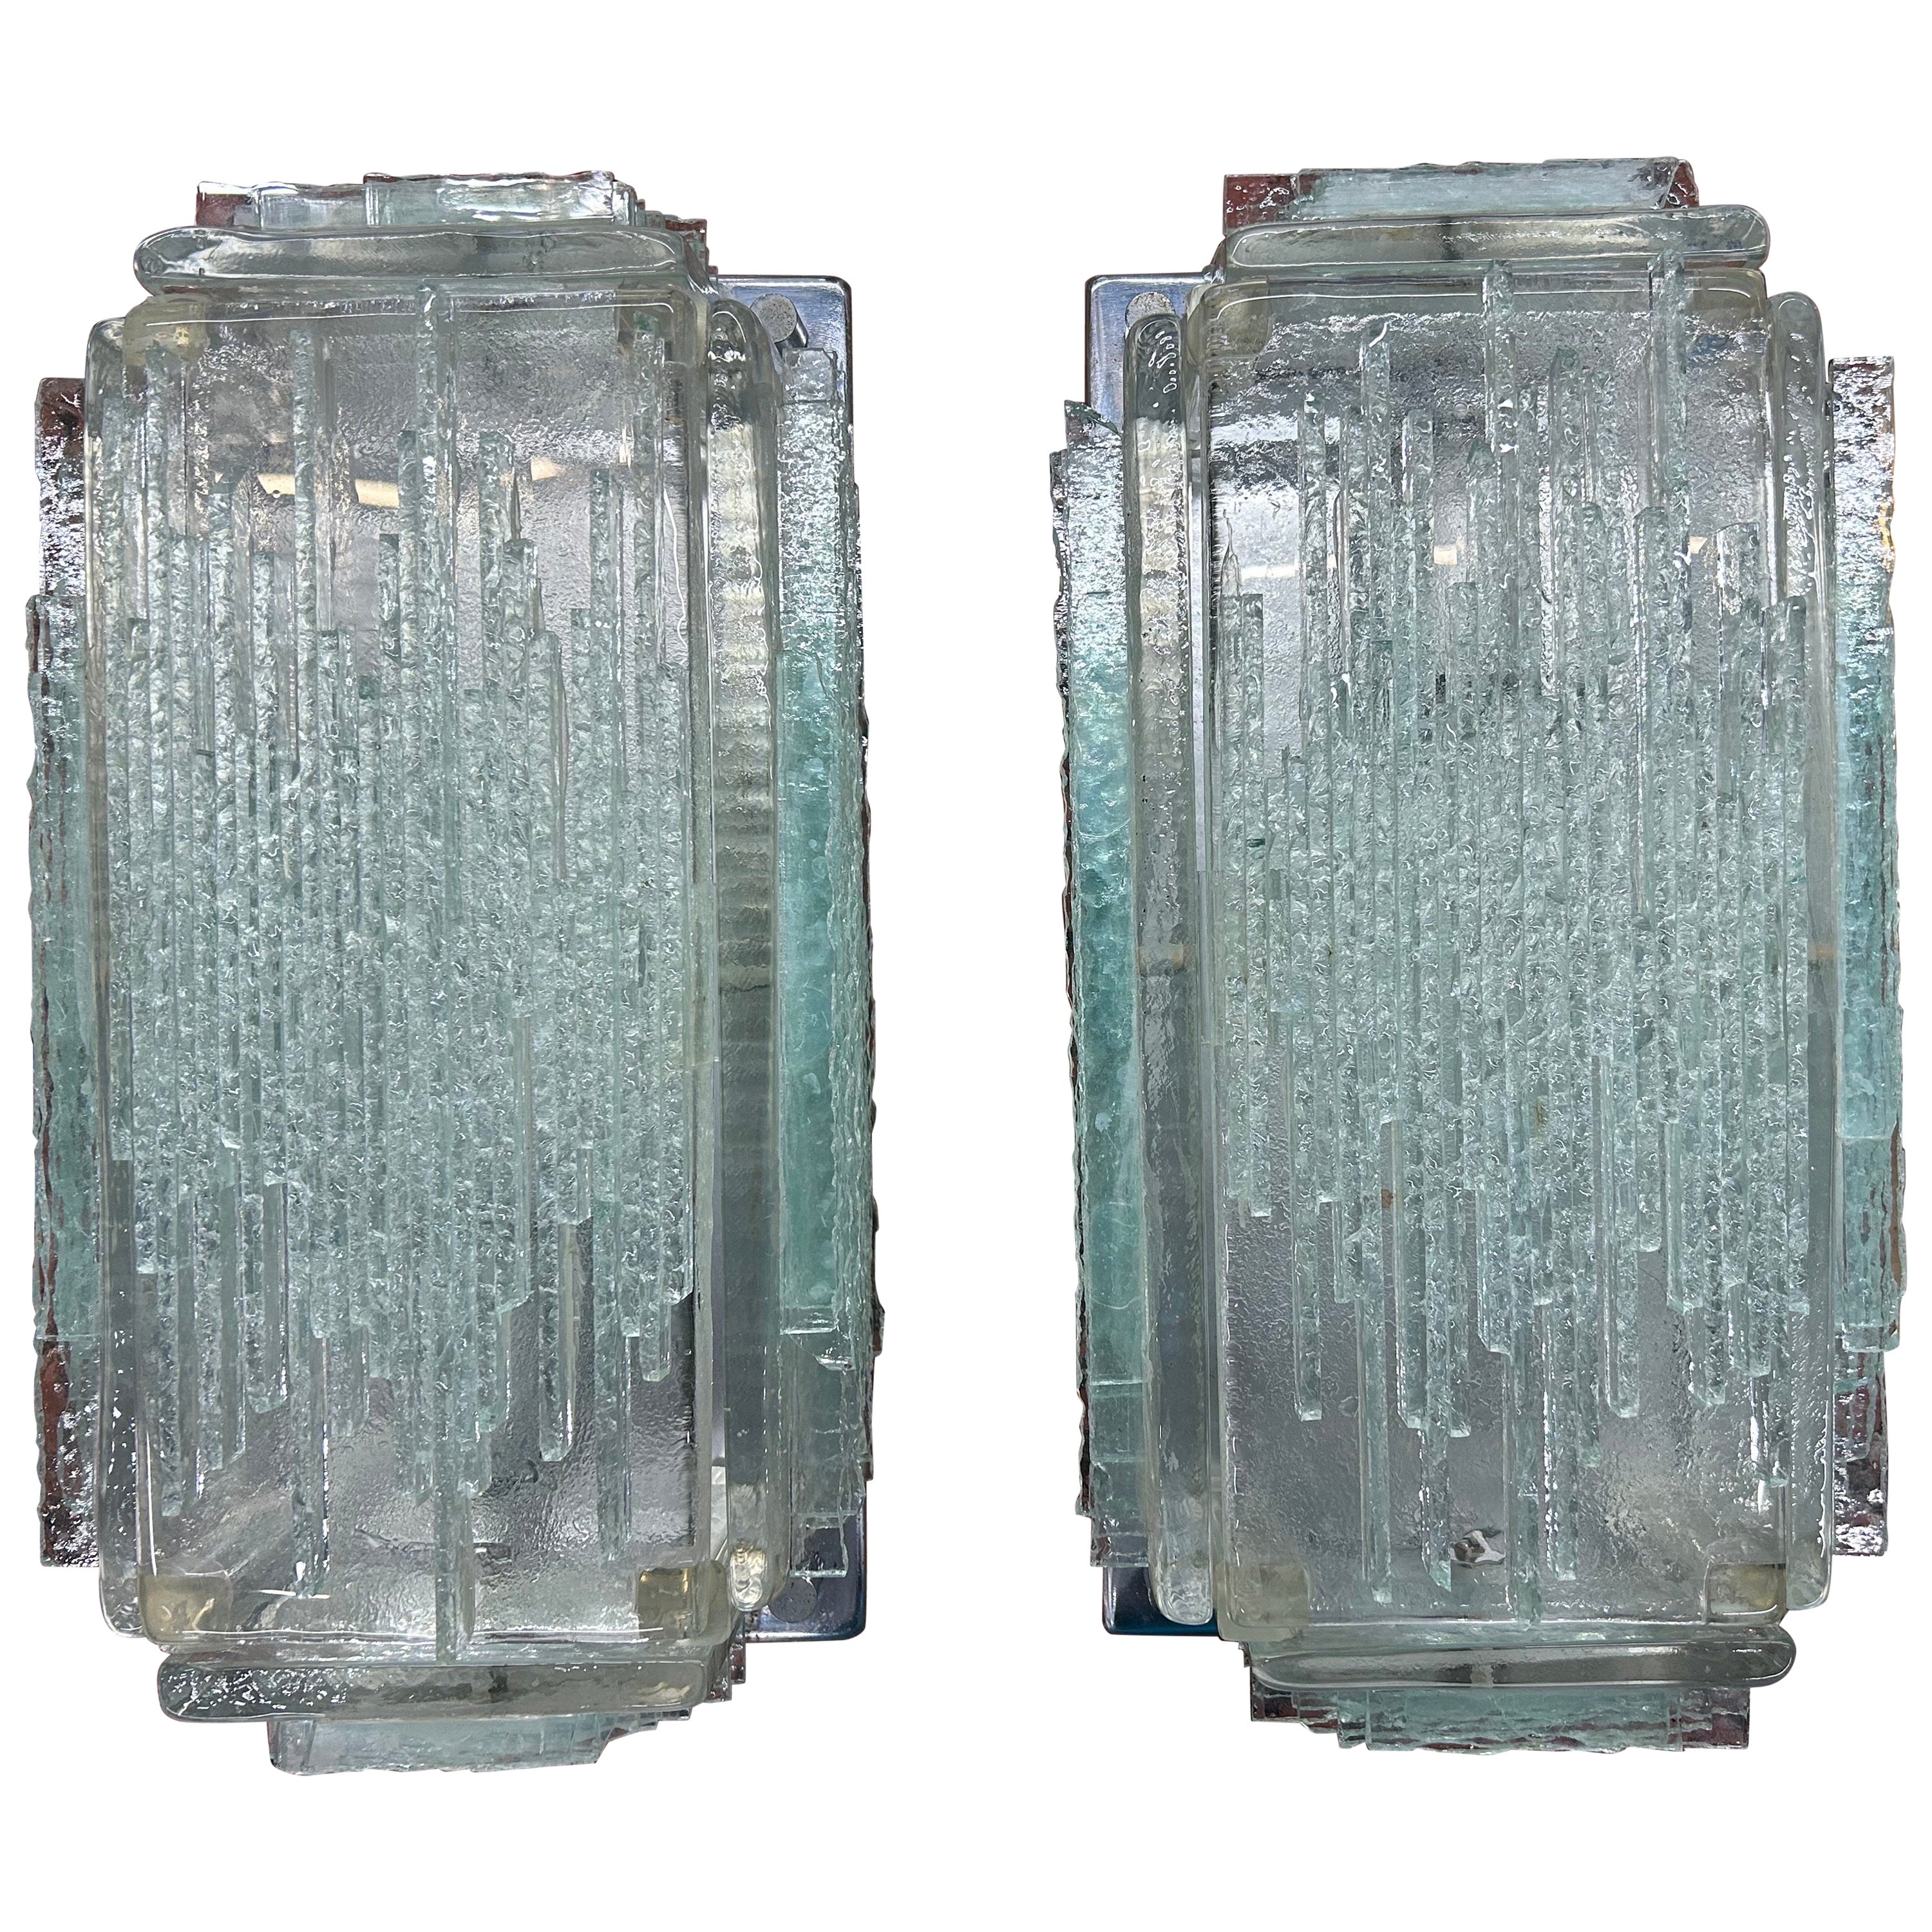 Pair Of Italian Glass Sconces By Poliarte